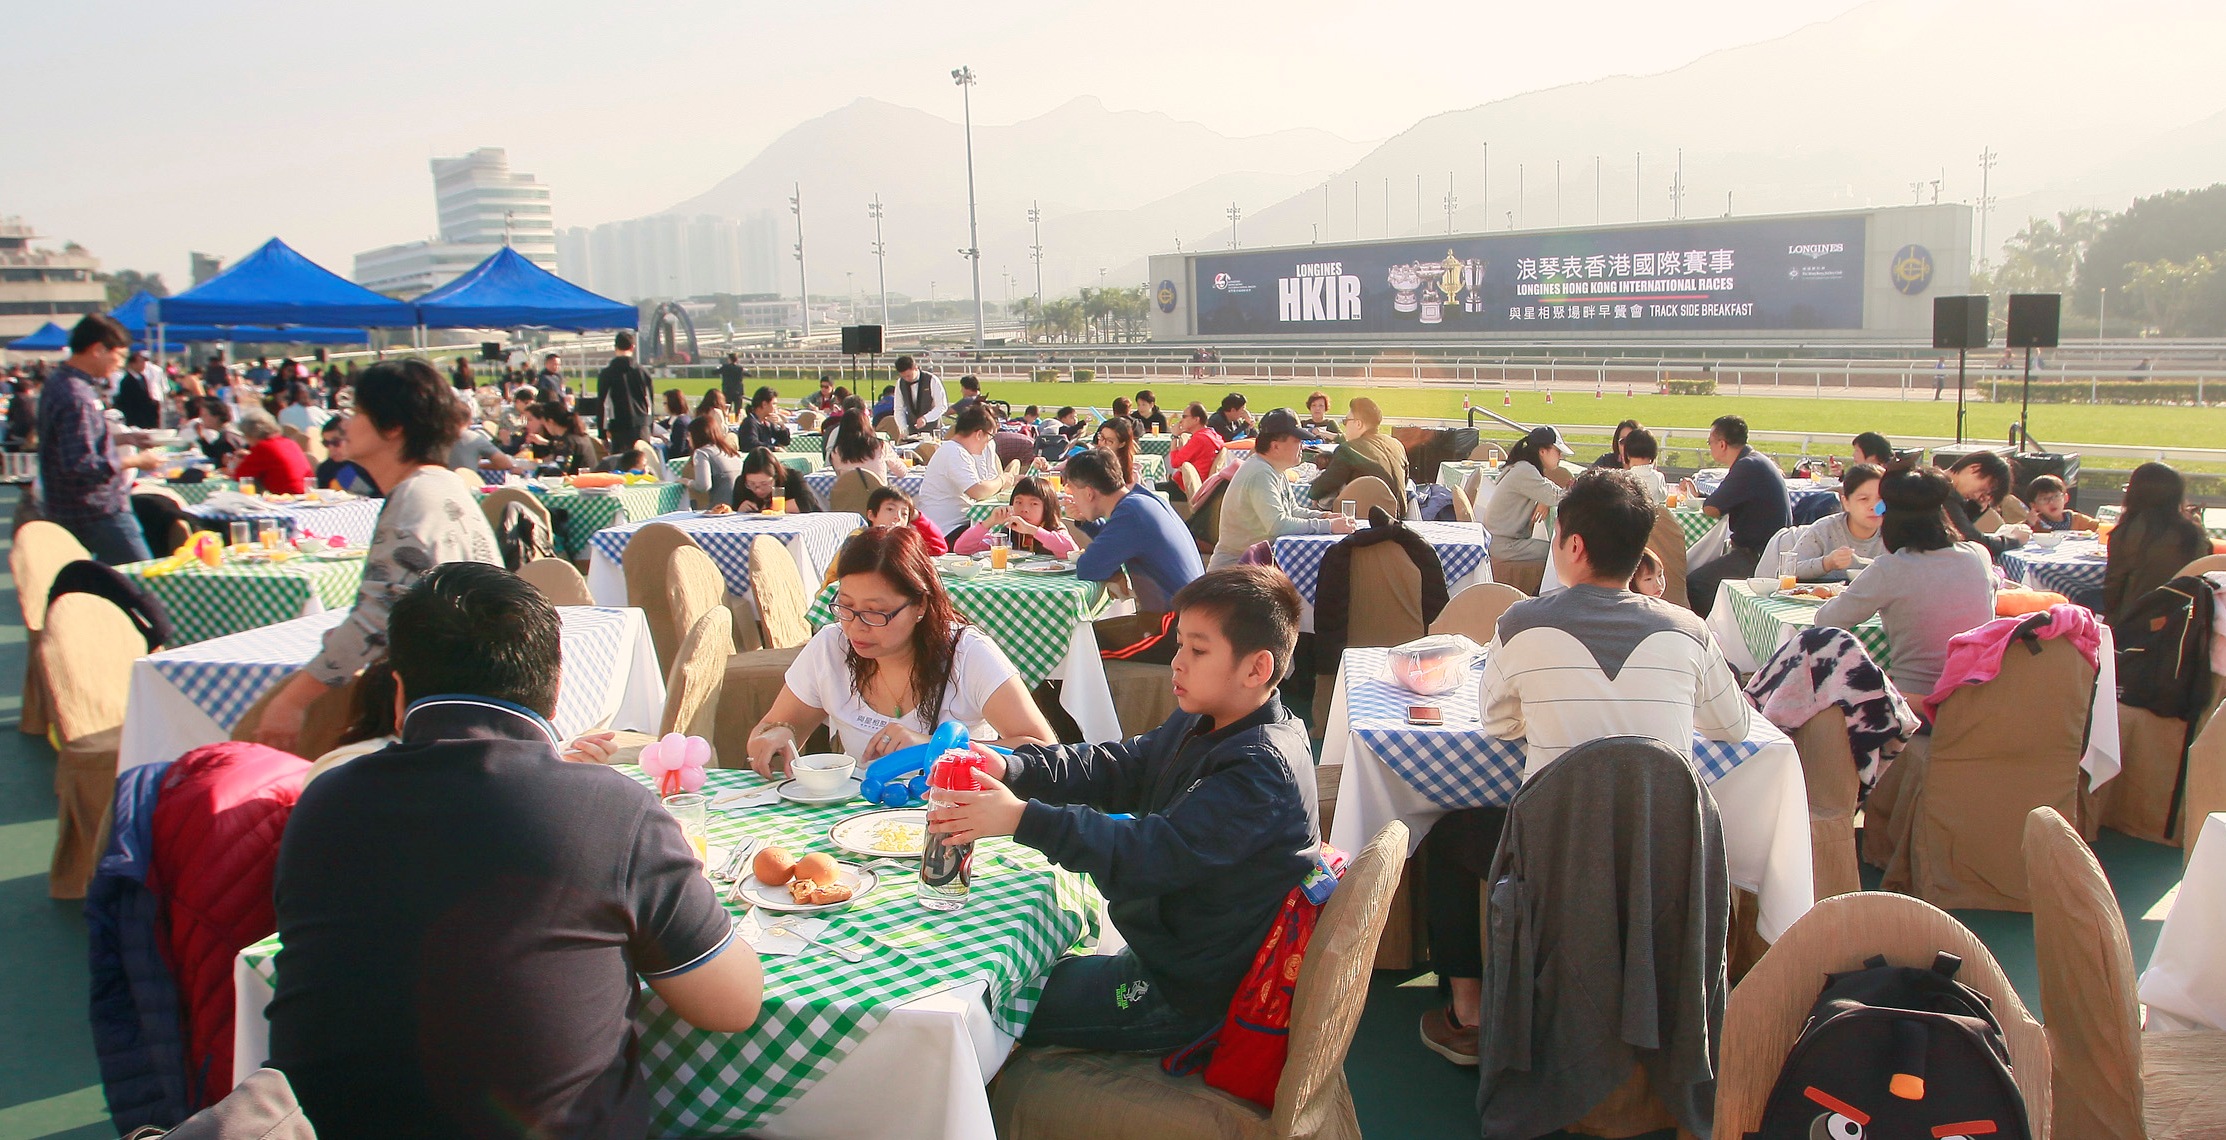 The fun event is a great opportunity for family gatherings, enabling parents and children to spend an enjoyable morning in the green space of Sha Tin Racecourse, with a buffet breakfast